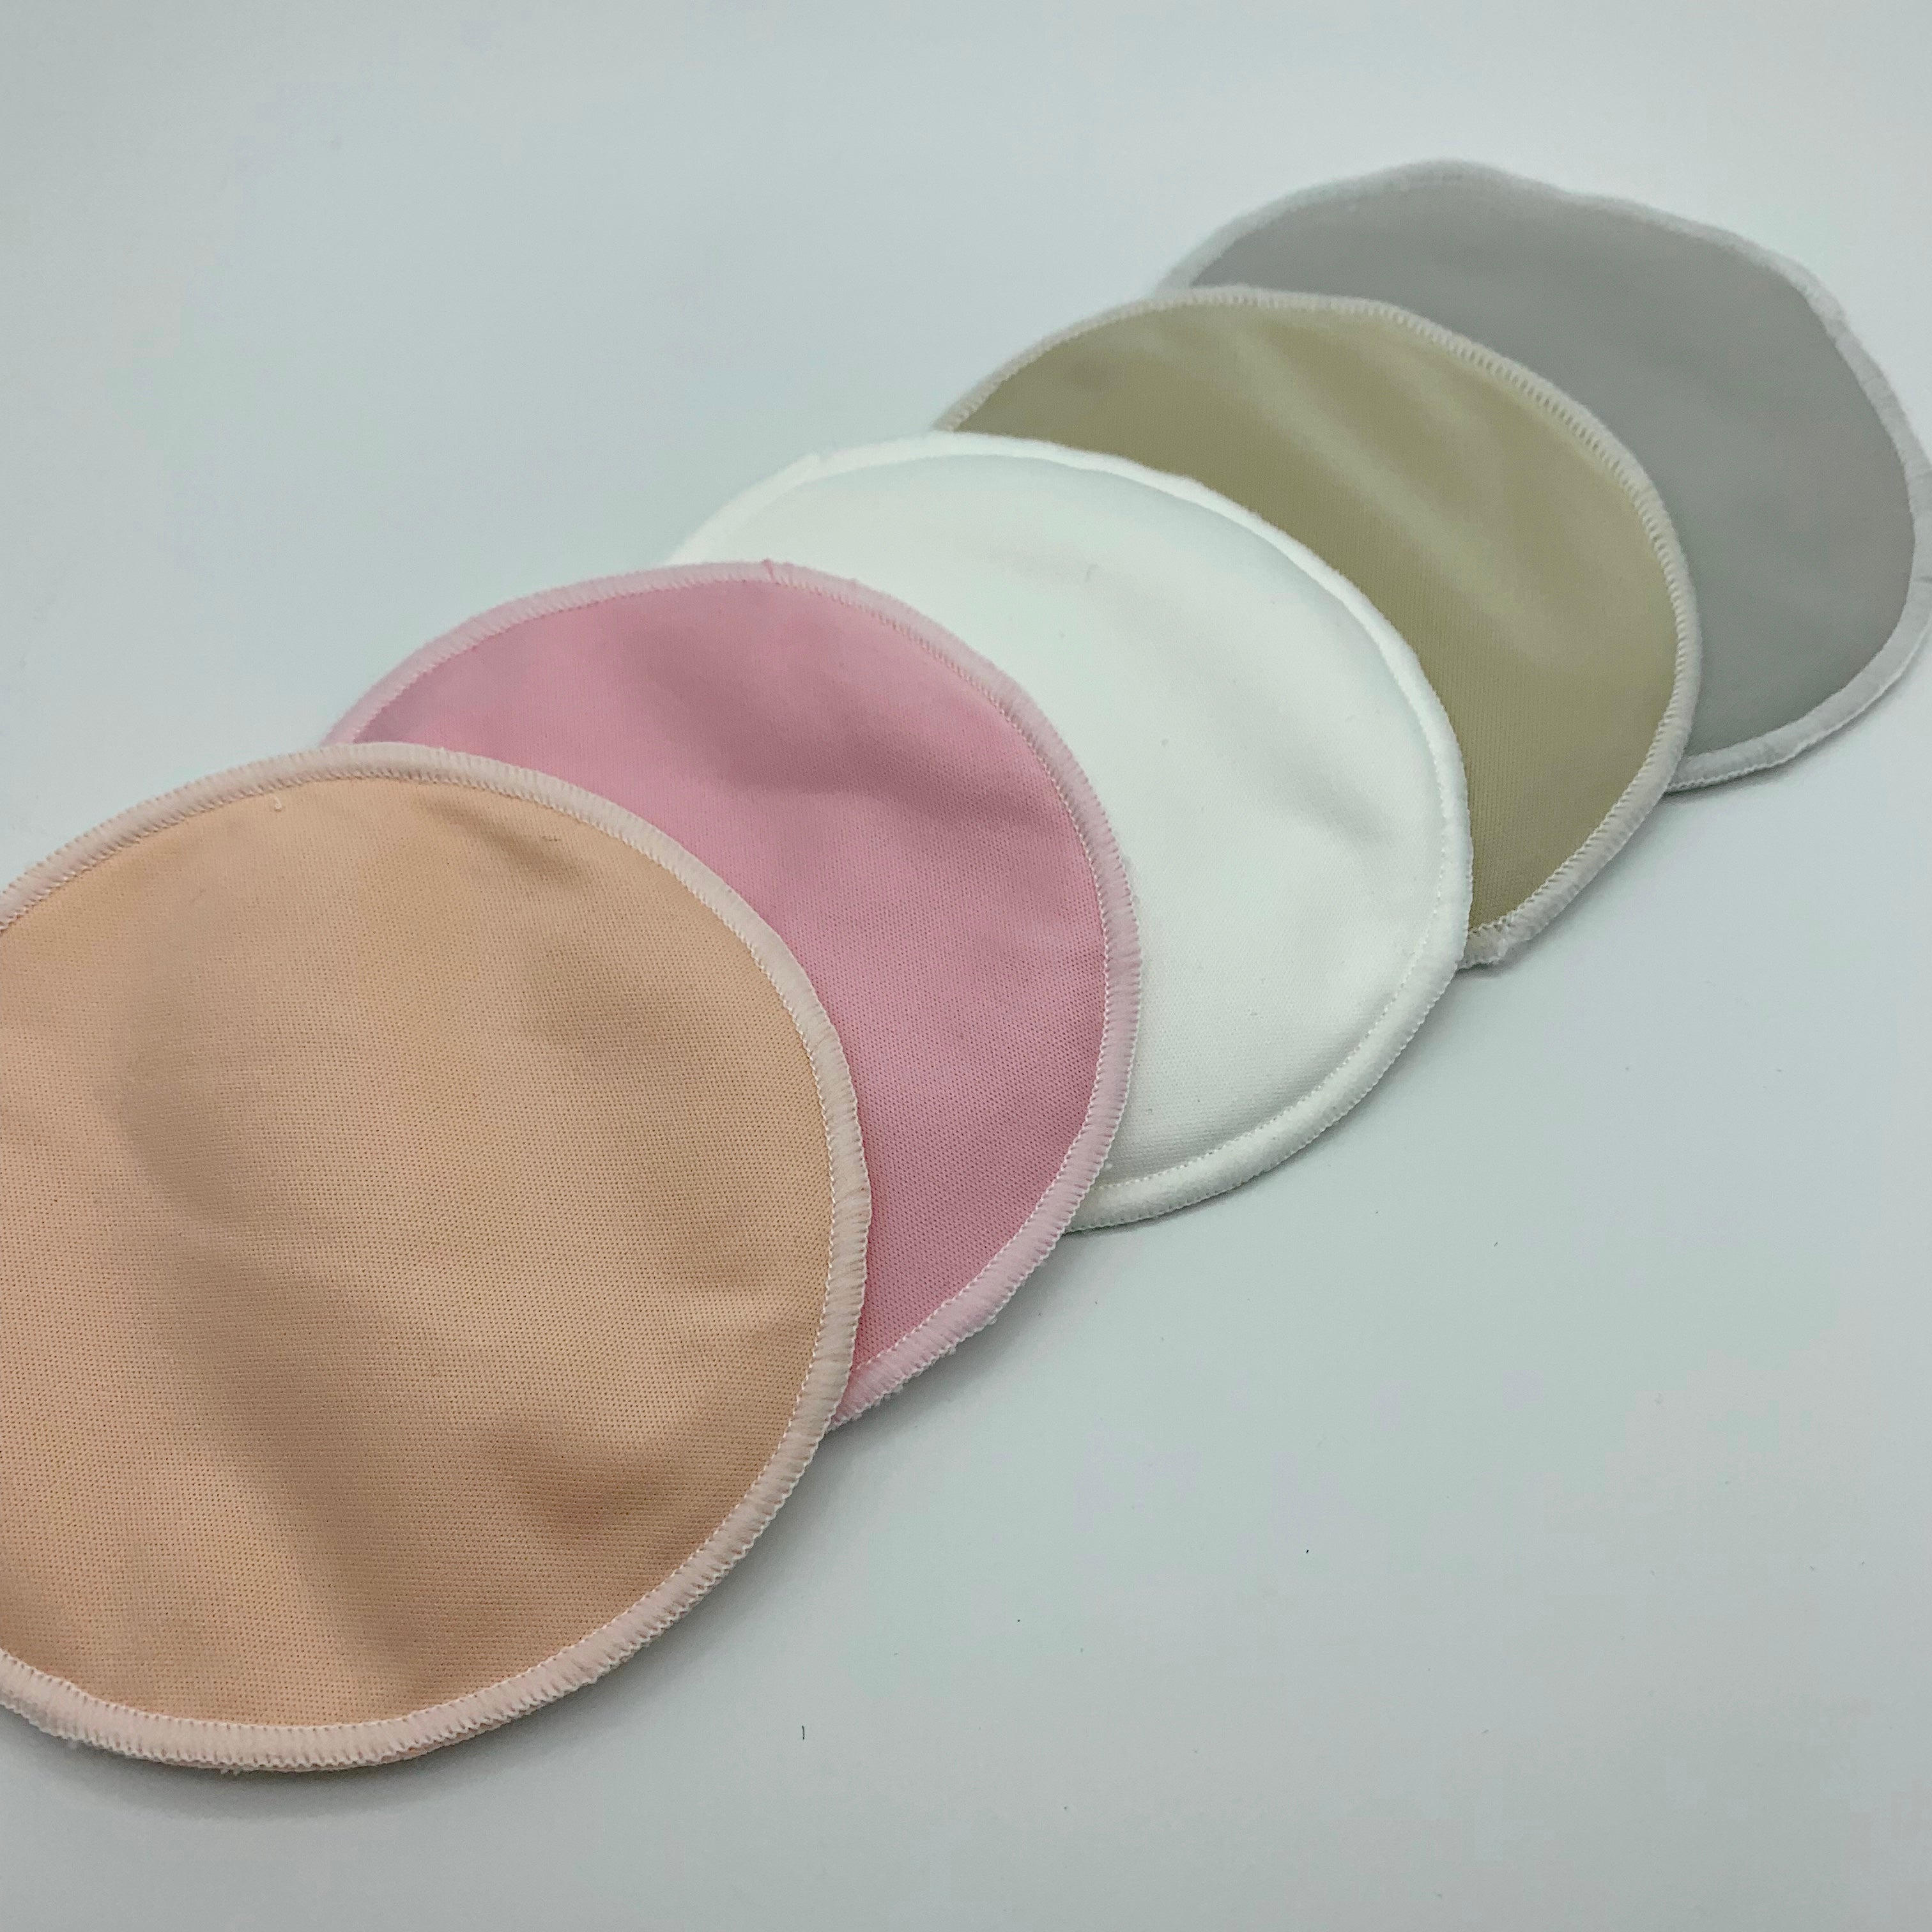 ALVABABY 2 Pack Pillow Cover Soft and Comfortable for Breastfeeding Moms So